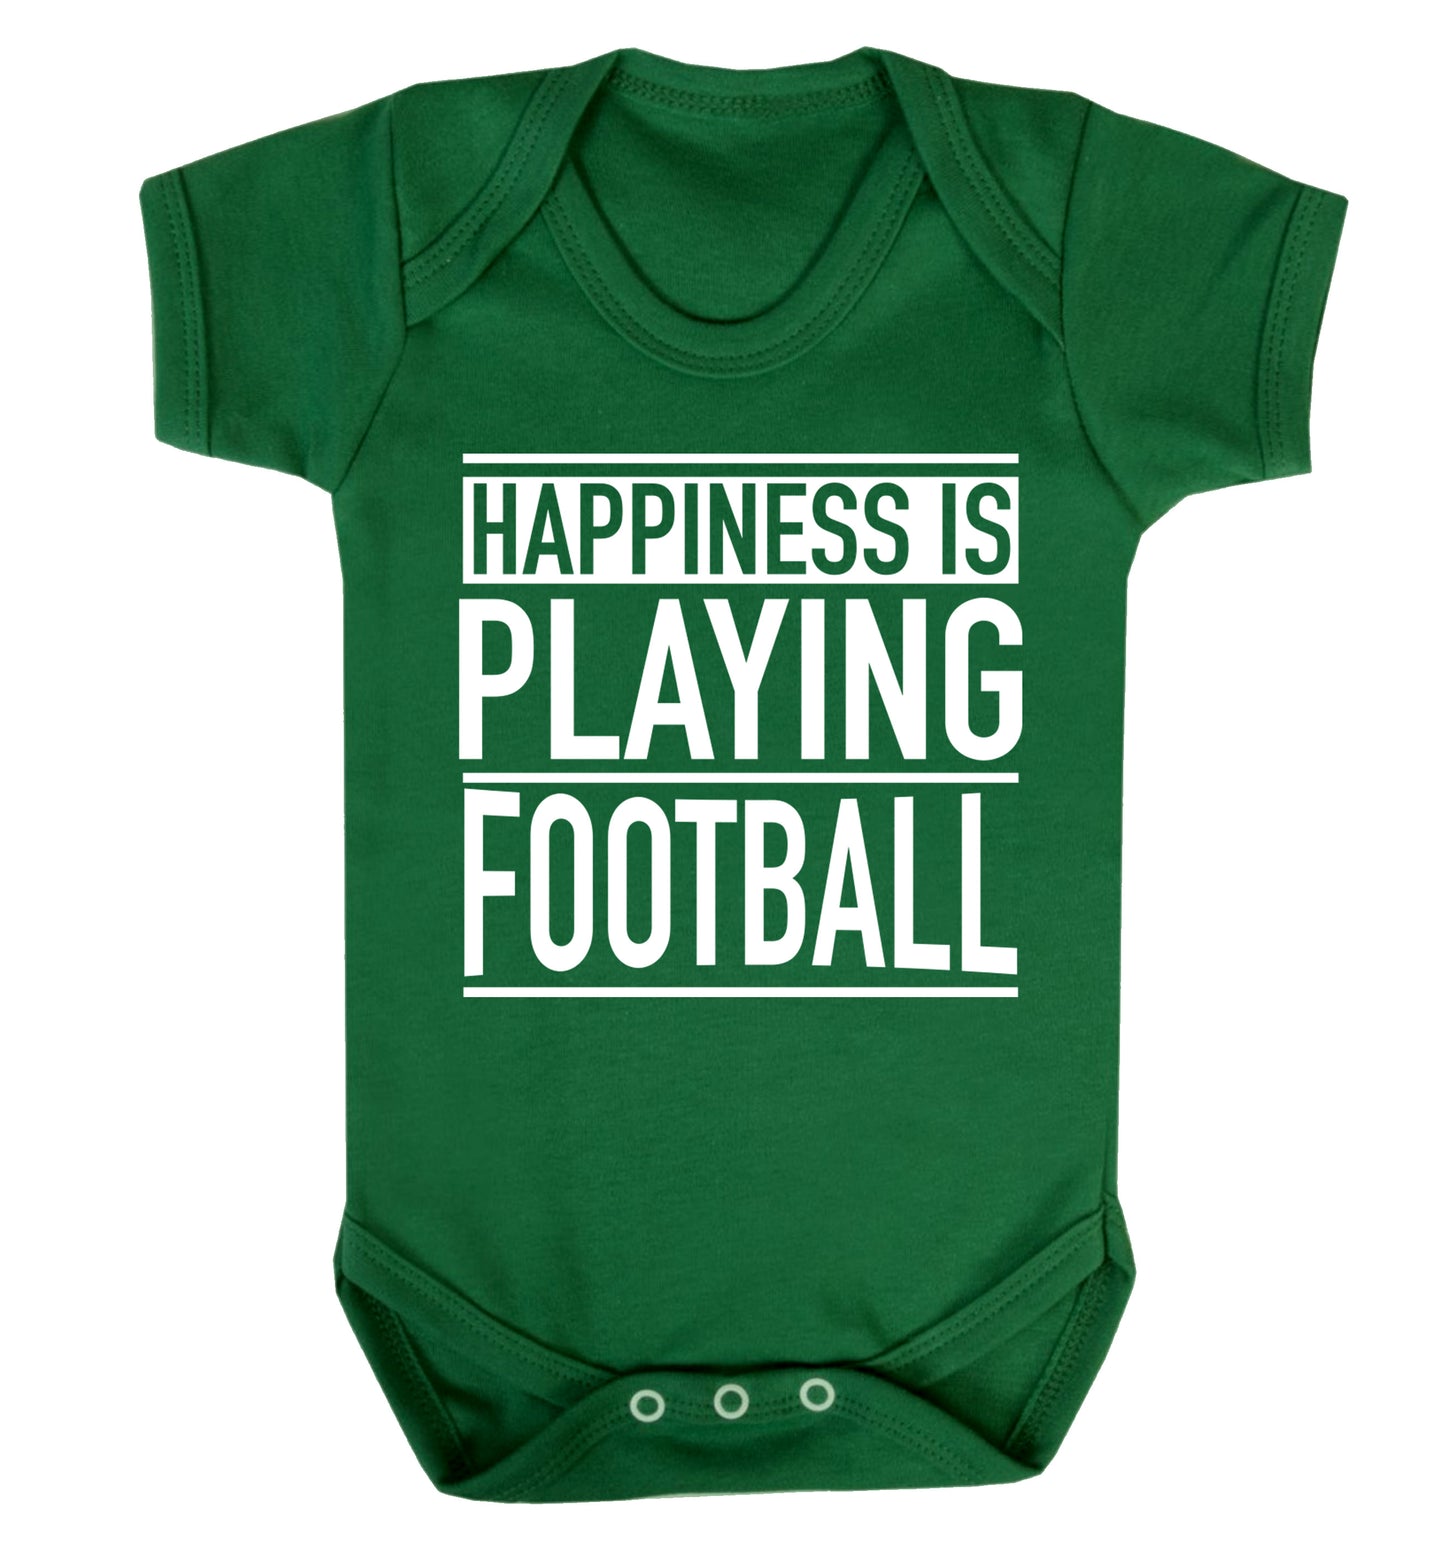 Happiness is playing football Baby Vest green 18-24 months